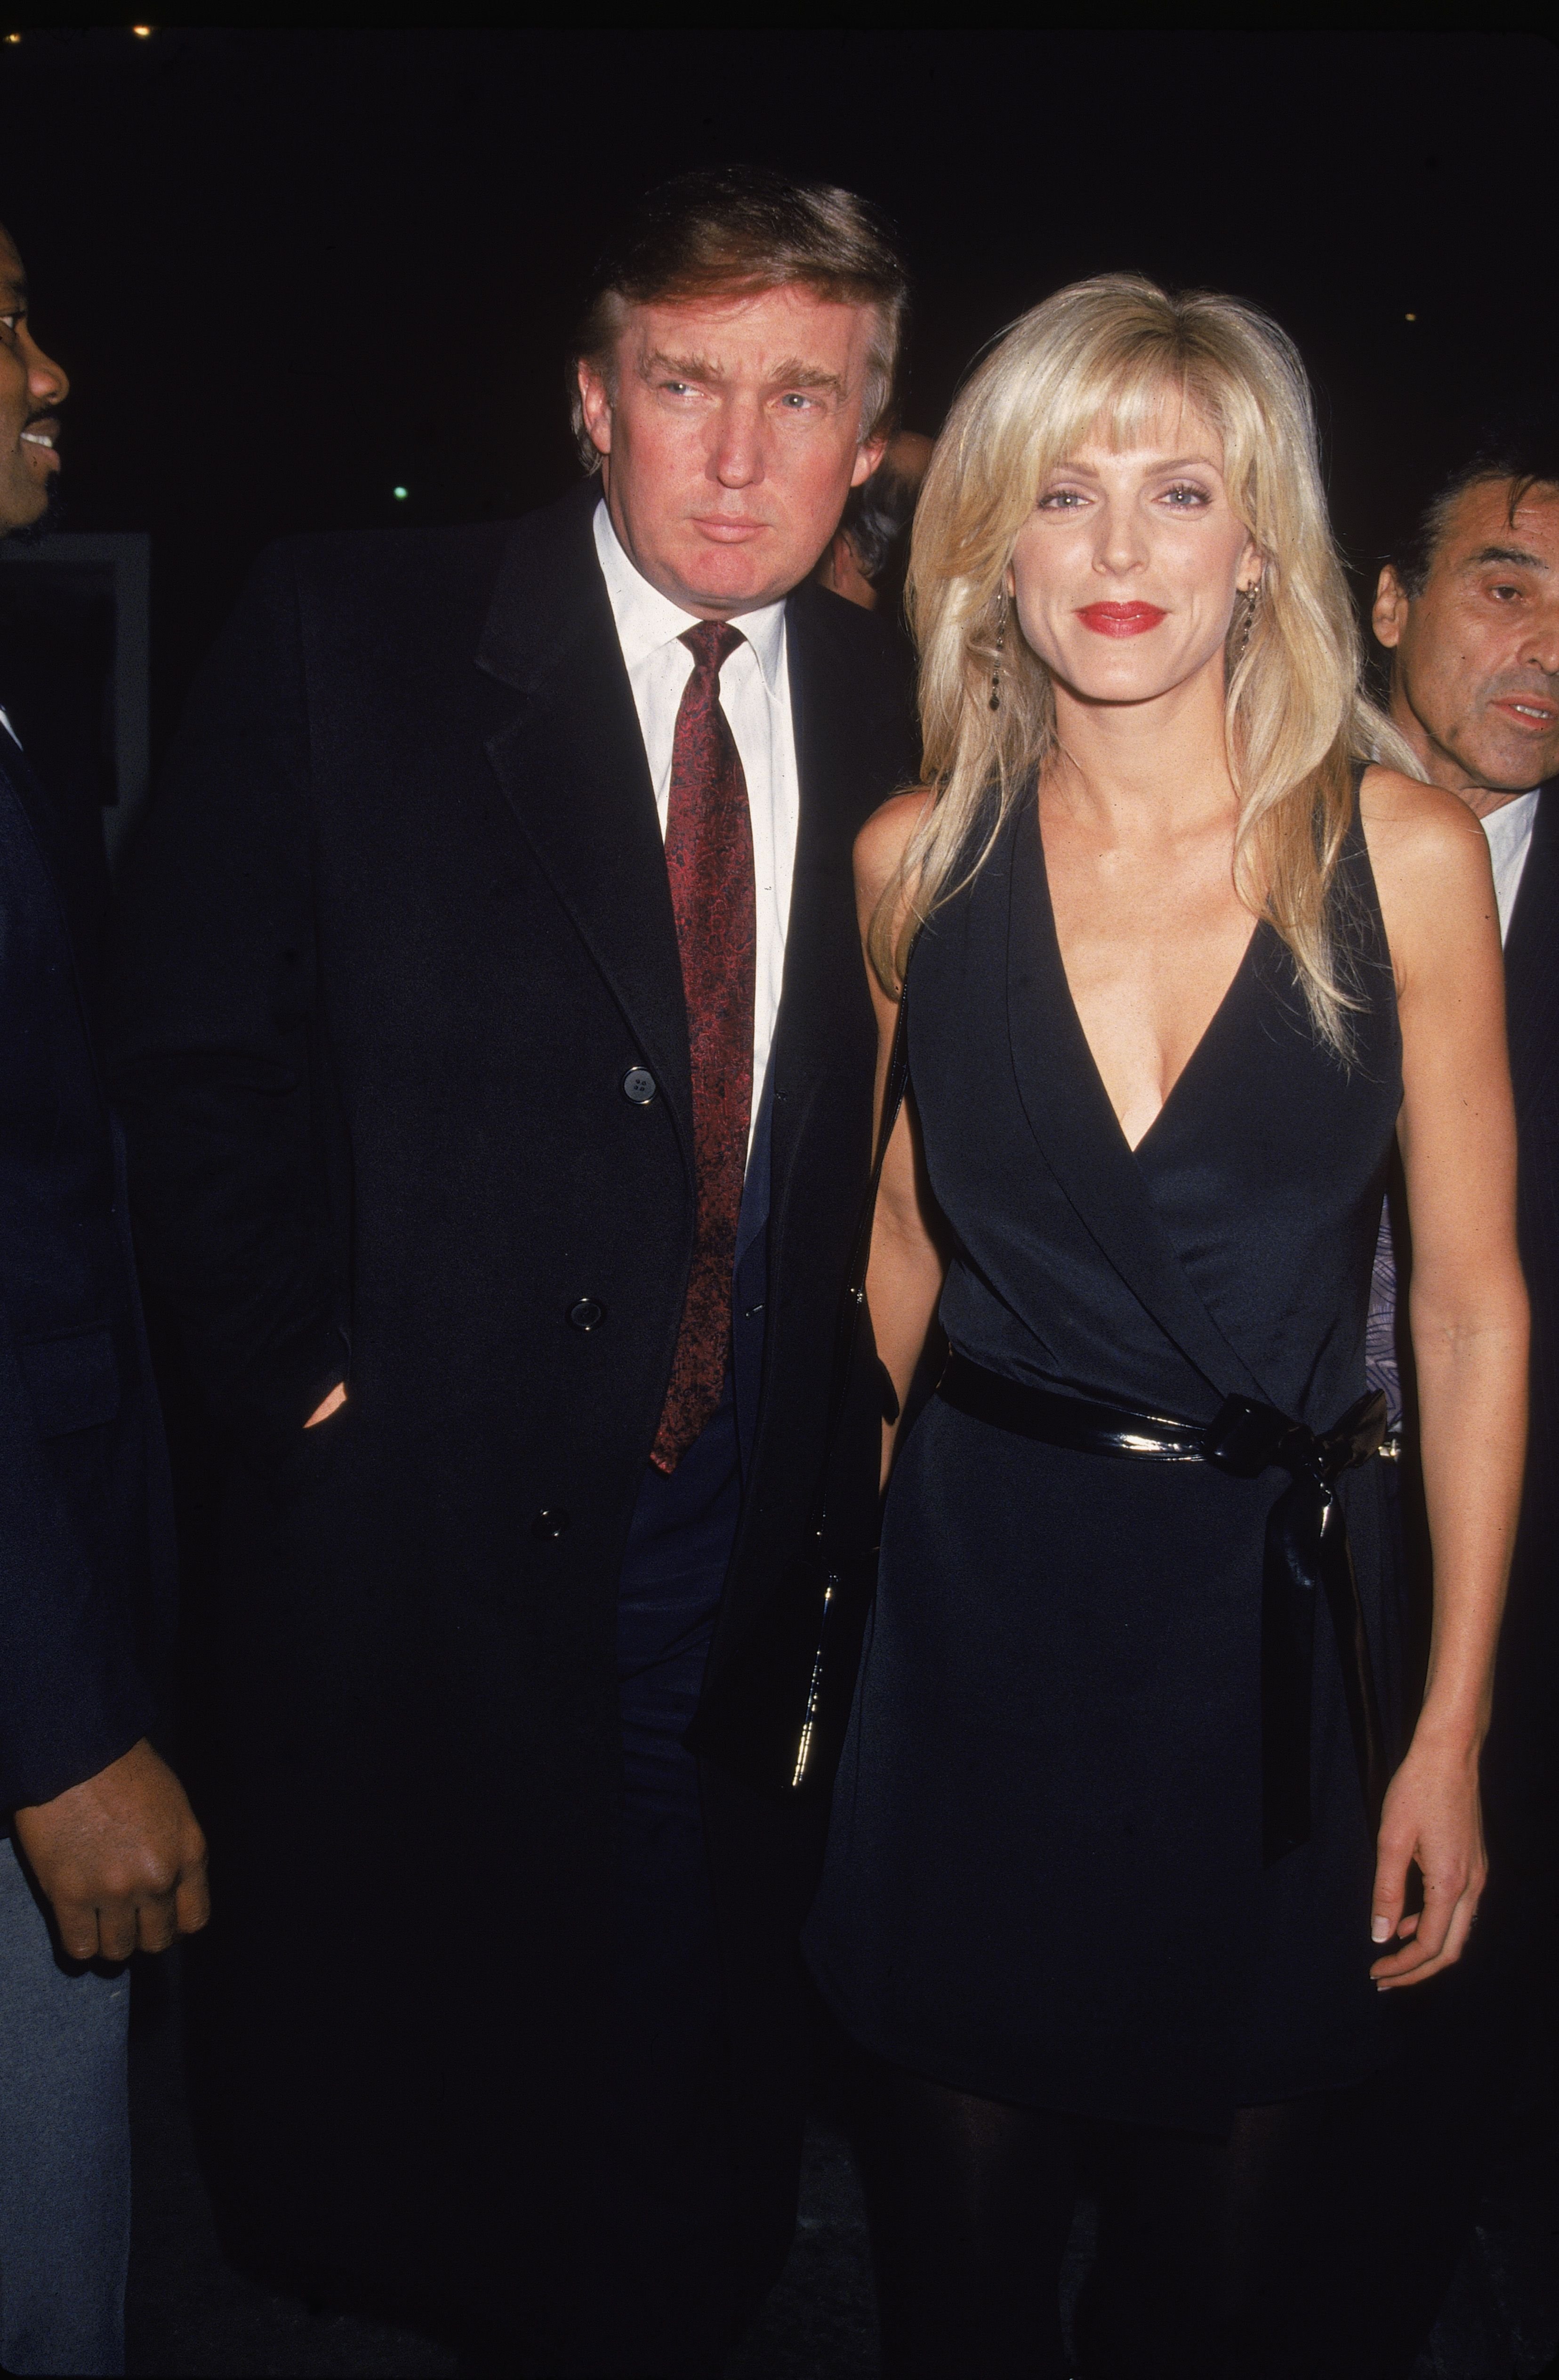 Donald Trump and Marla Maples  Donald Trump and Marla Maples at the Municipal Art Society Awards Gala in 1997 in New York | Source: Getty Images